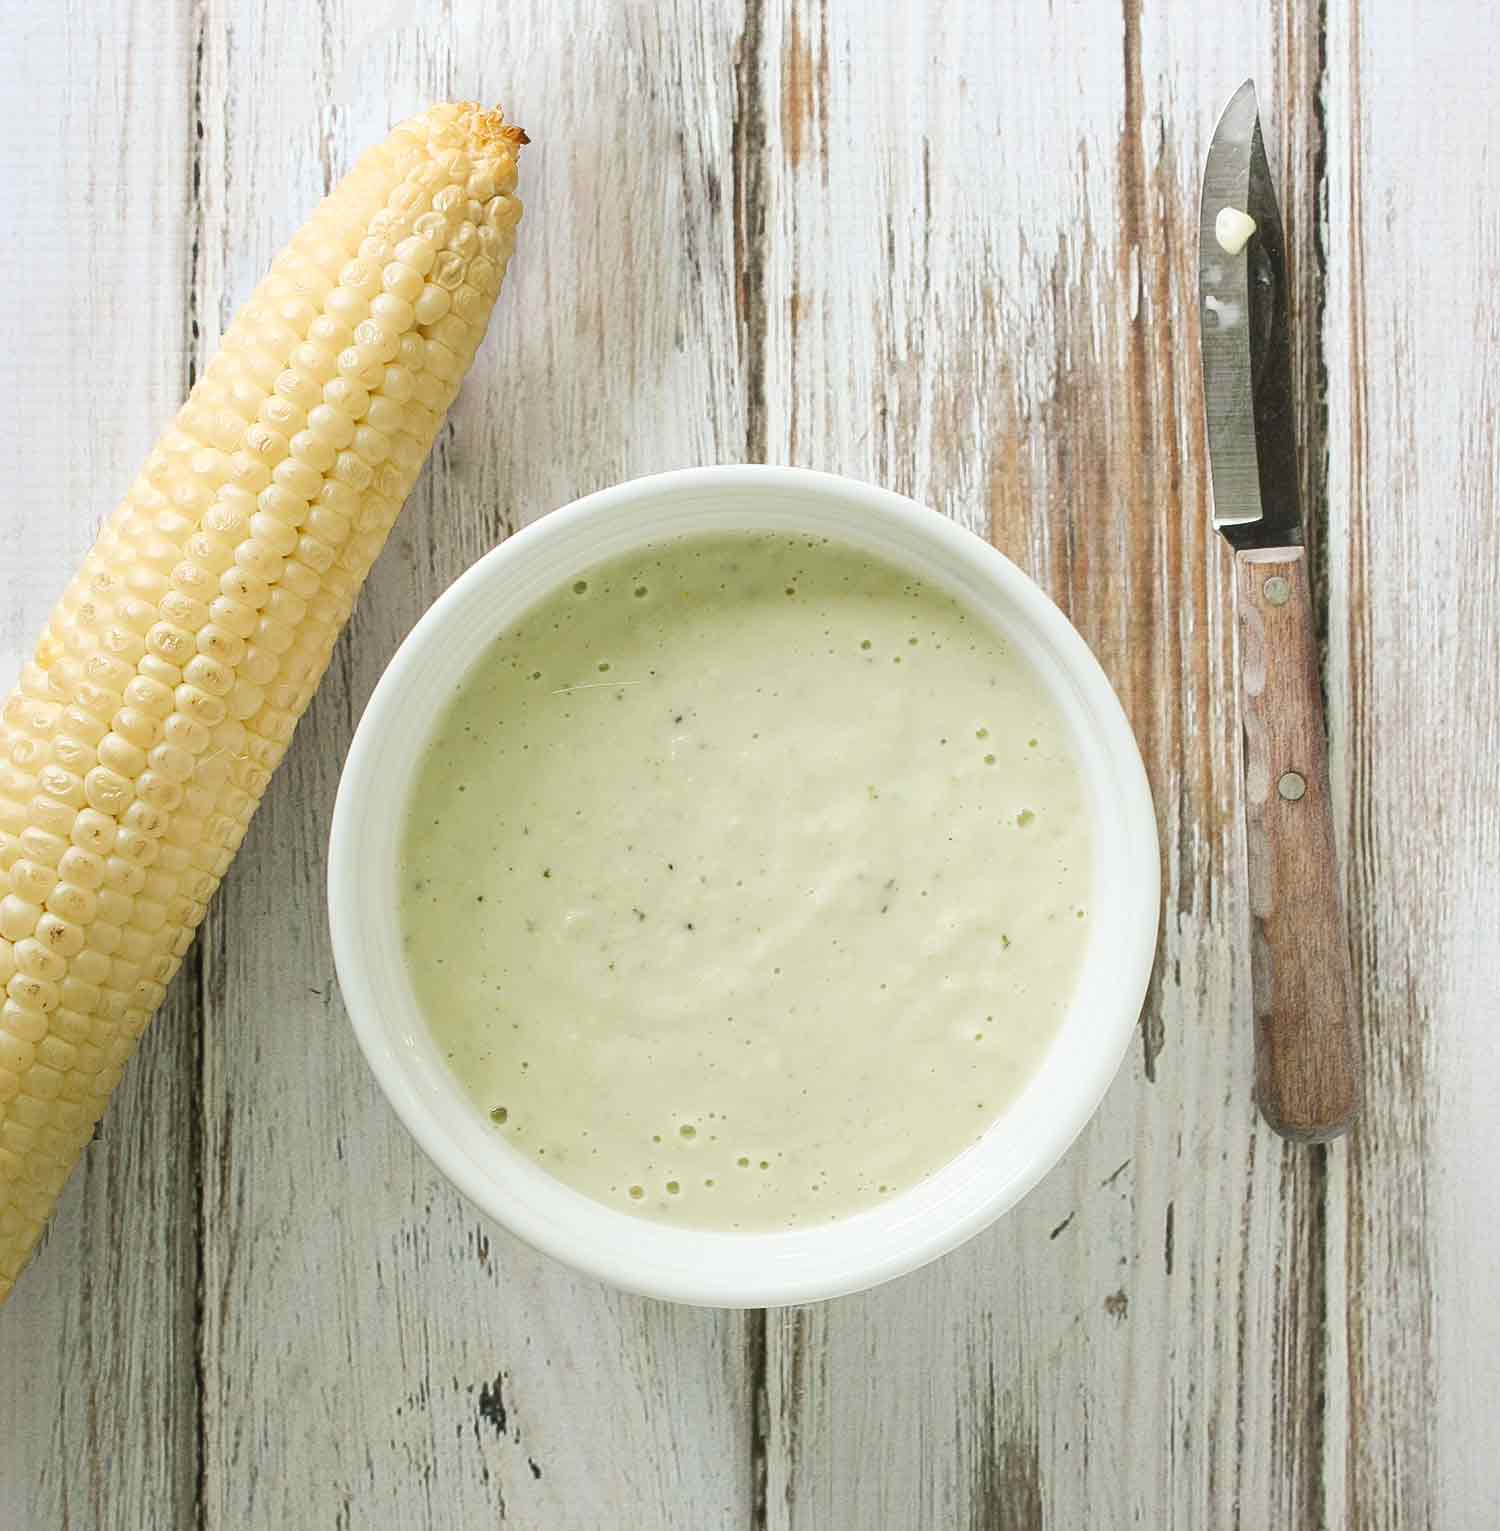 Smoke Corn Mayo in a white bowl with a smoked corn cob to the side.